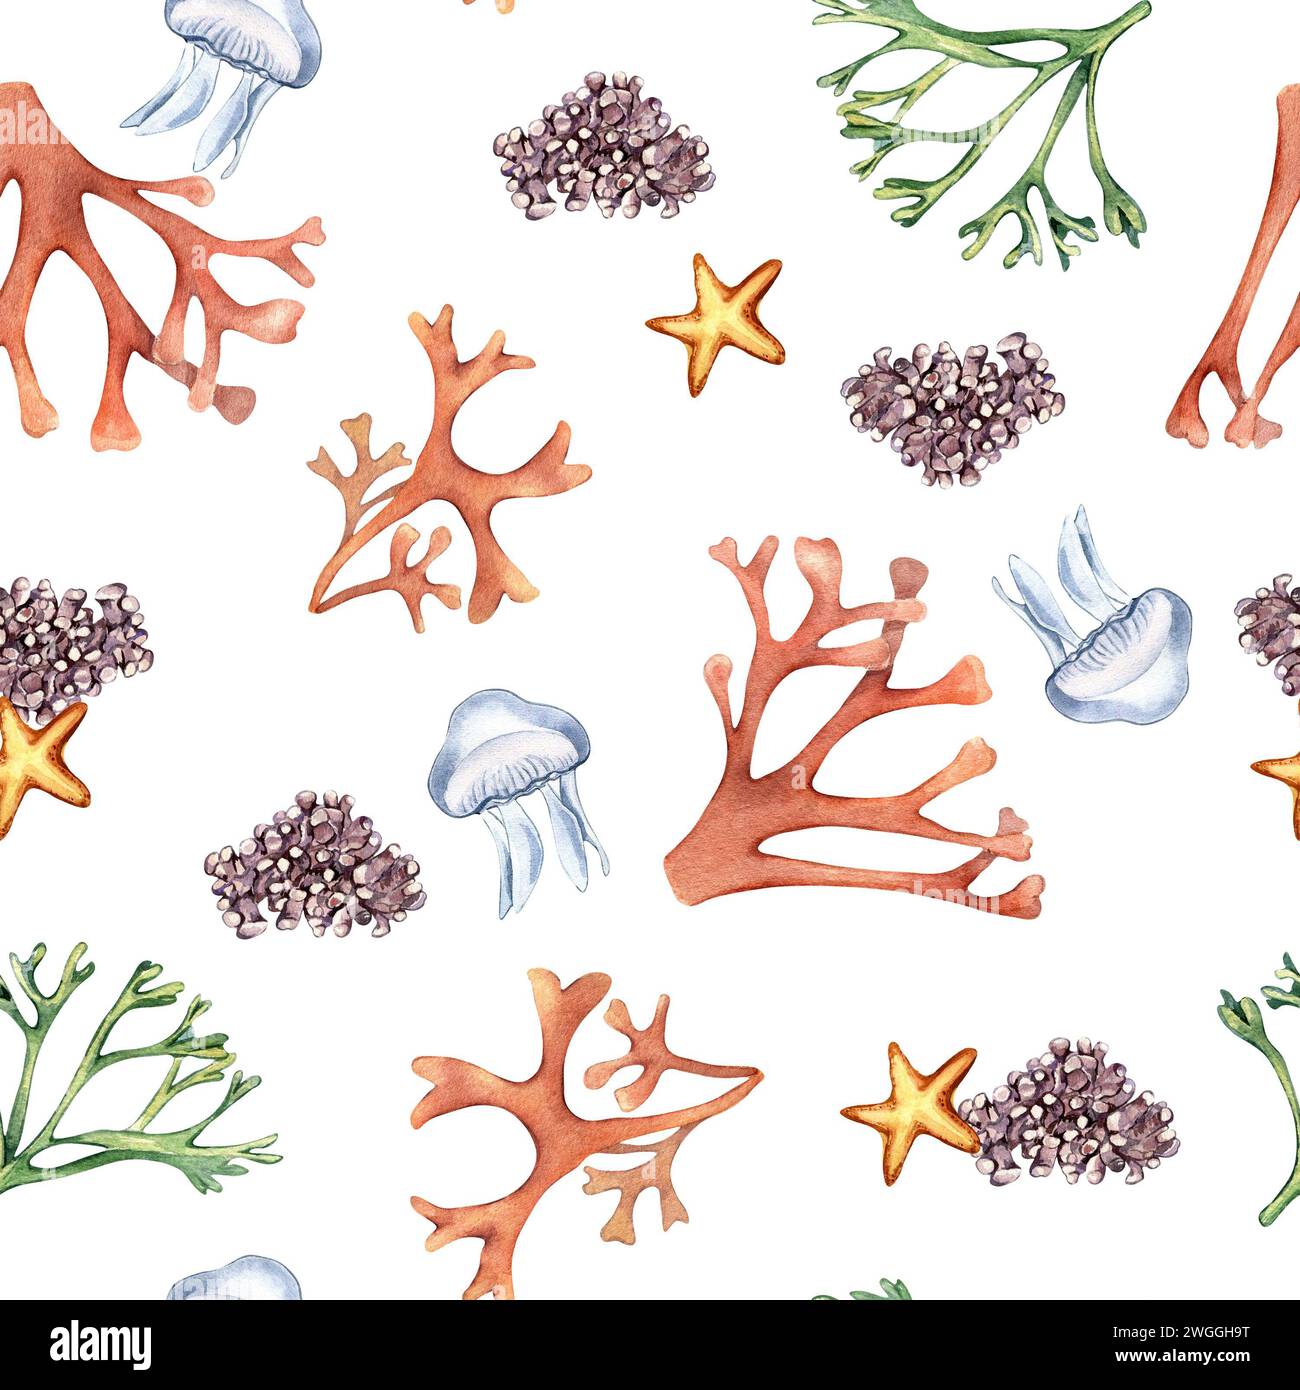 Watercolor seamless pattern of sea plants and starfish isolated on white. Seaweeds and coral hand drawn. Painted colorful algae print. Design element Stock Photo